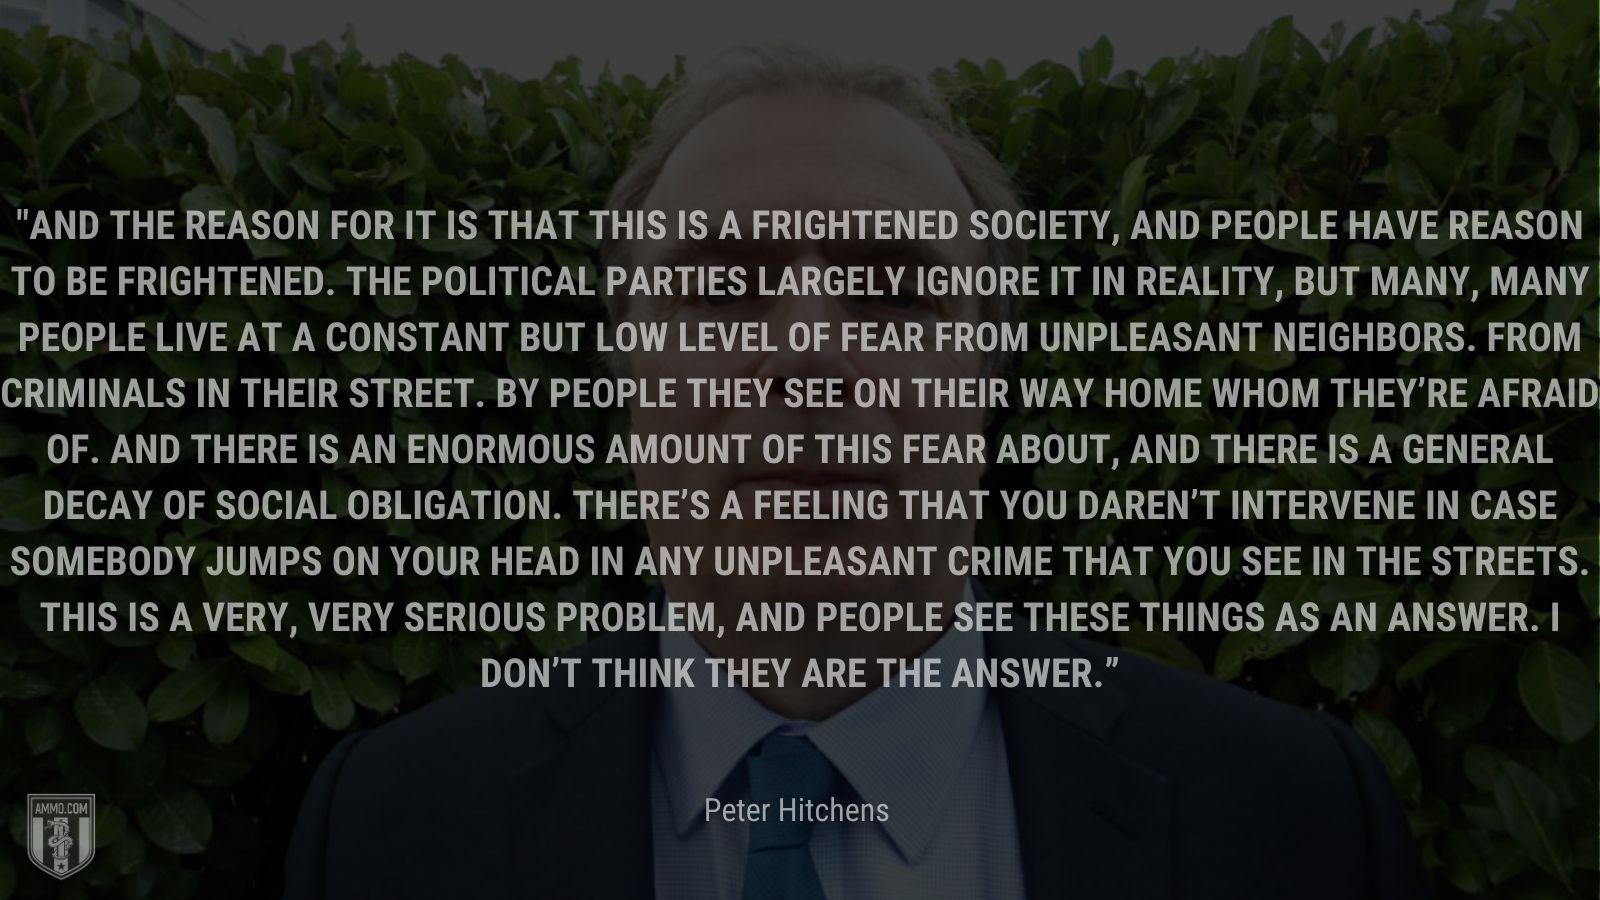 “And the reason for it is that this is a frightened society, and people have reason to be frightened. The political parties largely ignore it in reality, but many, many people live at a constant but low level of fear from unpleasant neighbors. From criminals in their street. By people they see on their way home whom they’re afraid of. And there is an enormous amount of this fear about, and there is a general decay of social obligation. There’s a feeling that you daren’t intervene in case somebody jumps on your head in any unpleasant crime that you see in the streets. This is a very, very serious problem, and people see these things as an answer. I don’t think they are the answer.” - Peter Hitchens